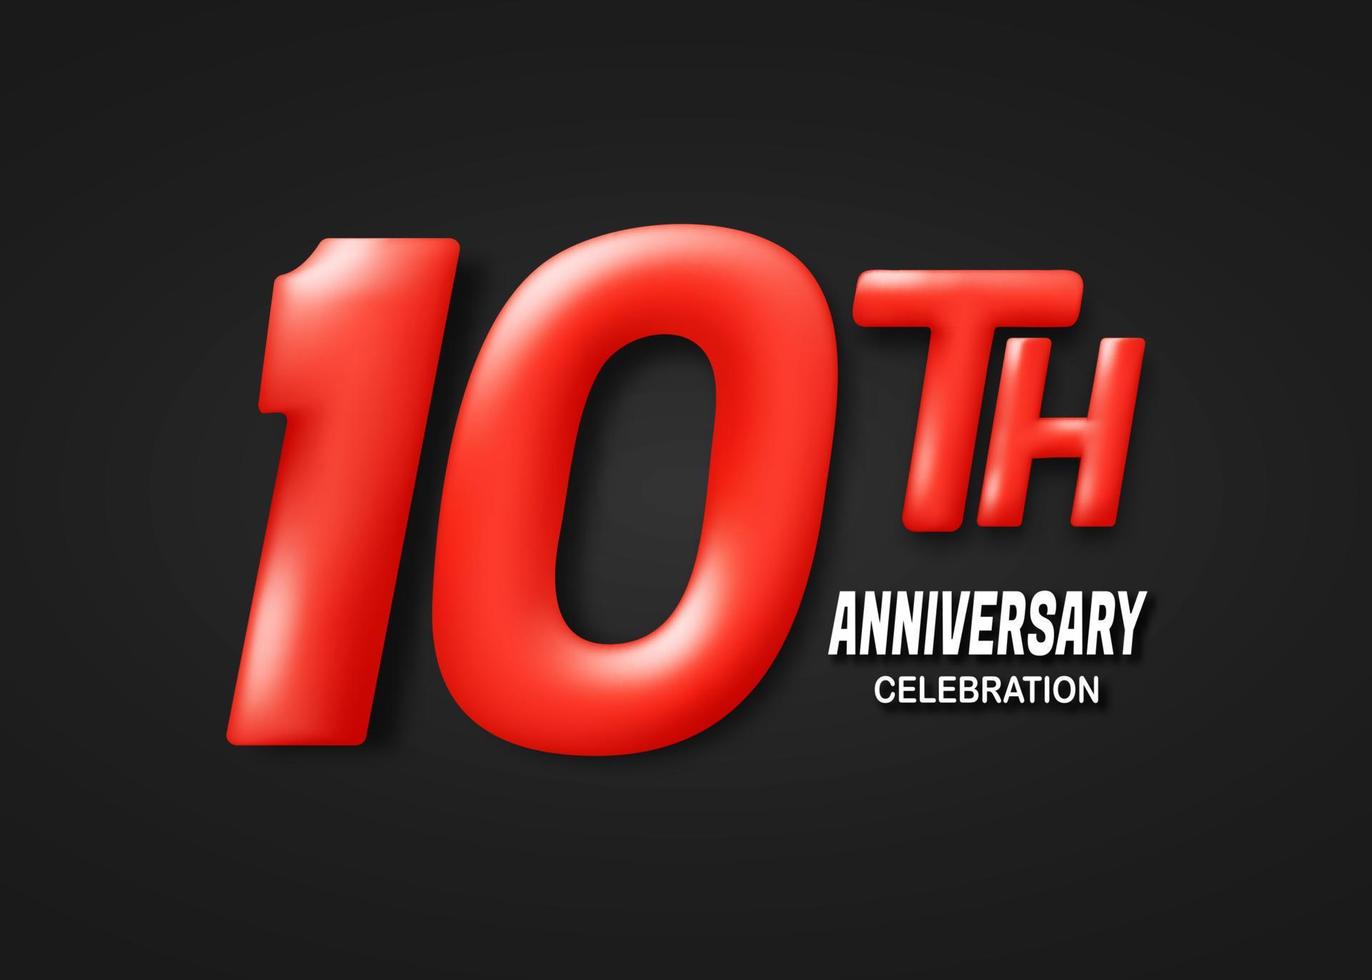 10 year anniversary template. 3d red number isolated on black background. for birthday or wedding greeting cards, etc. vector illustration